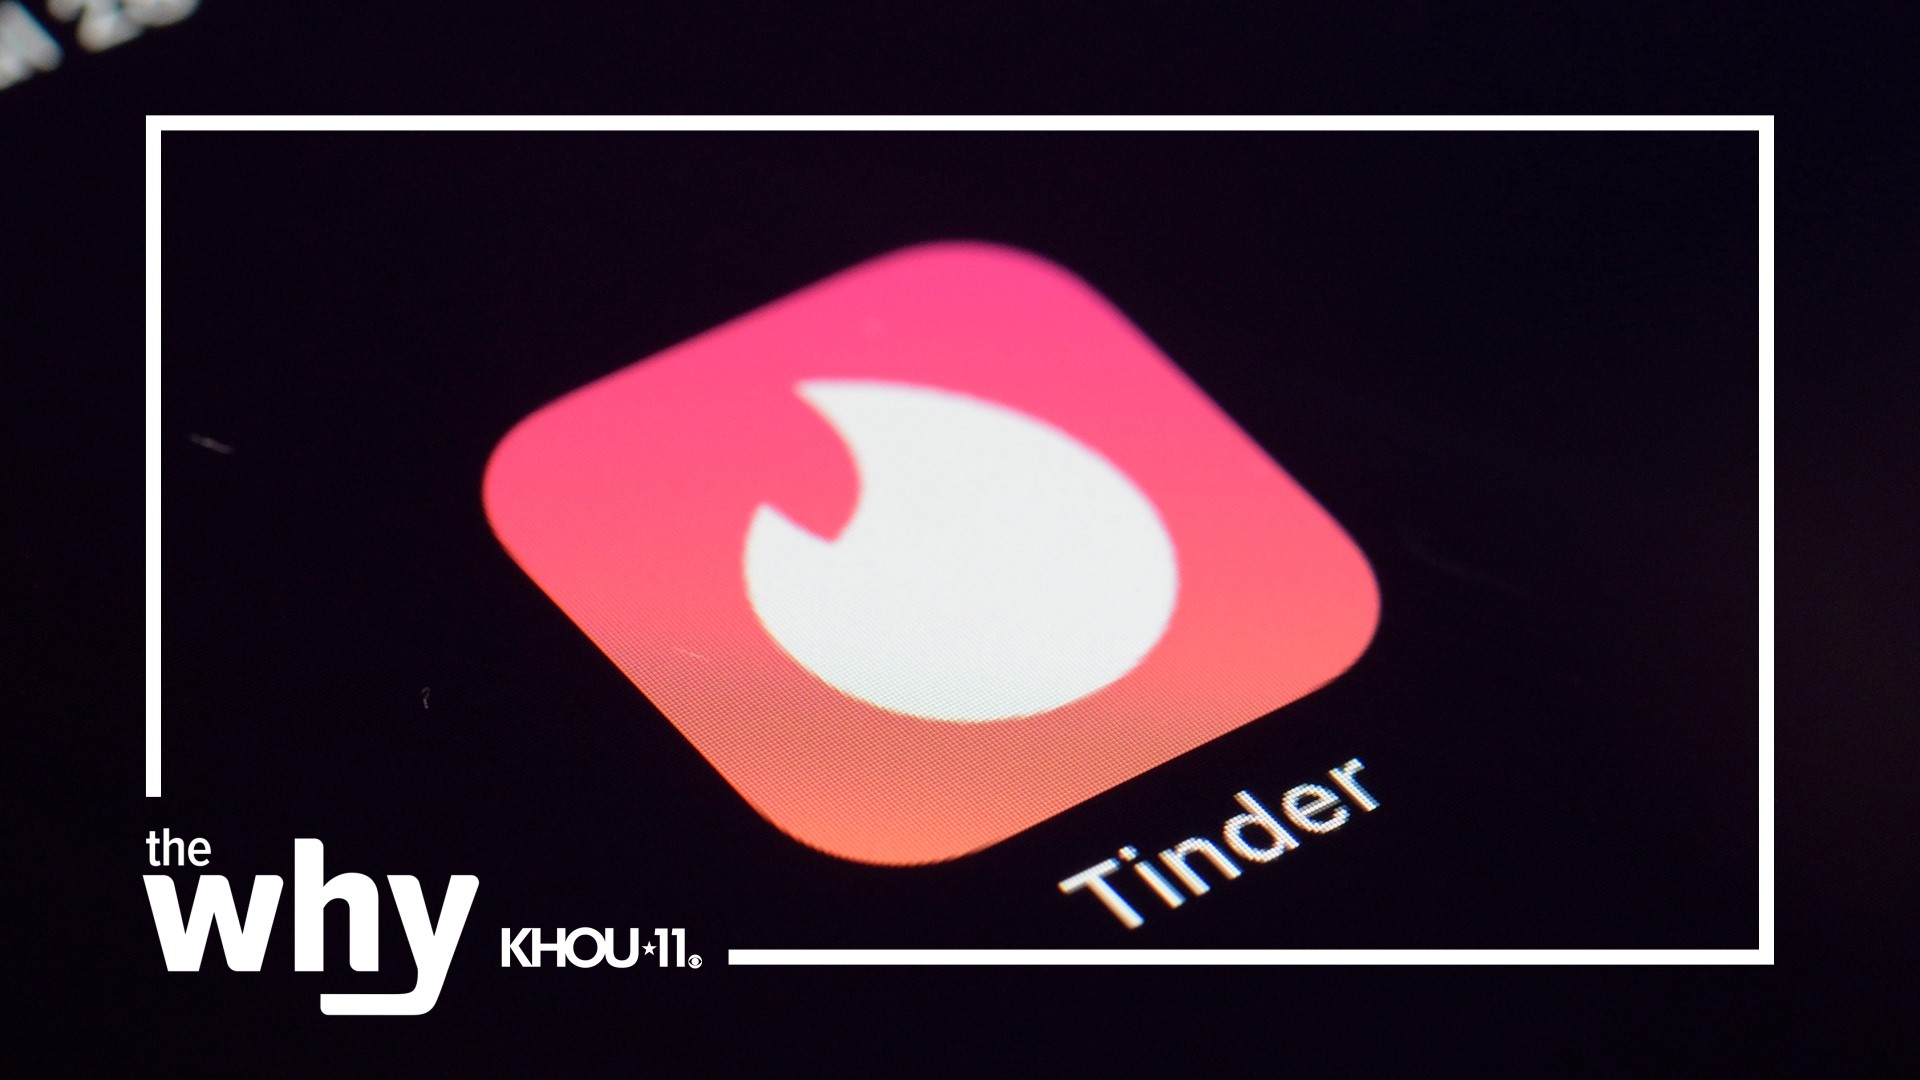 Swiping right for too long can lead some to give up on looking for love.